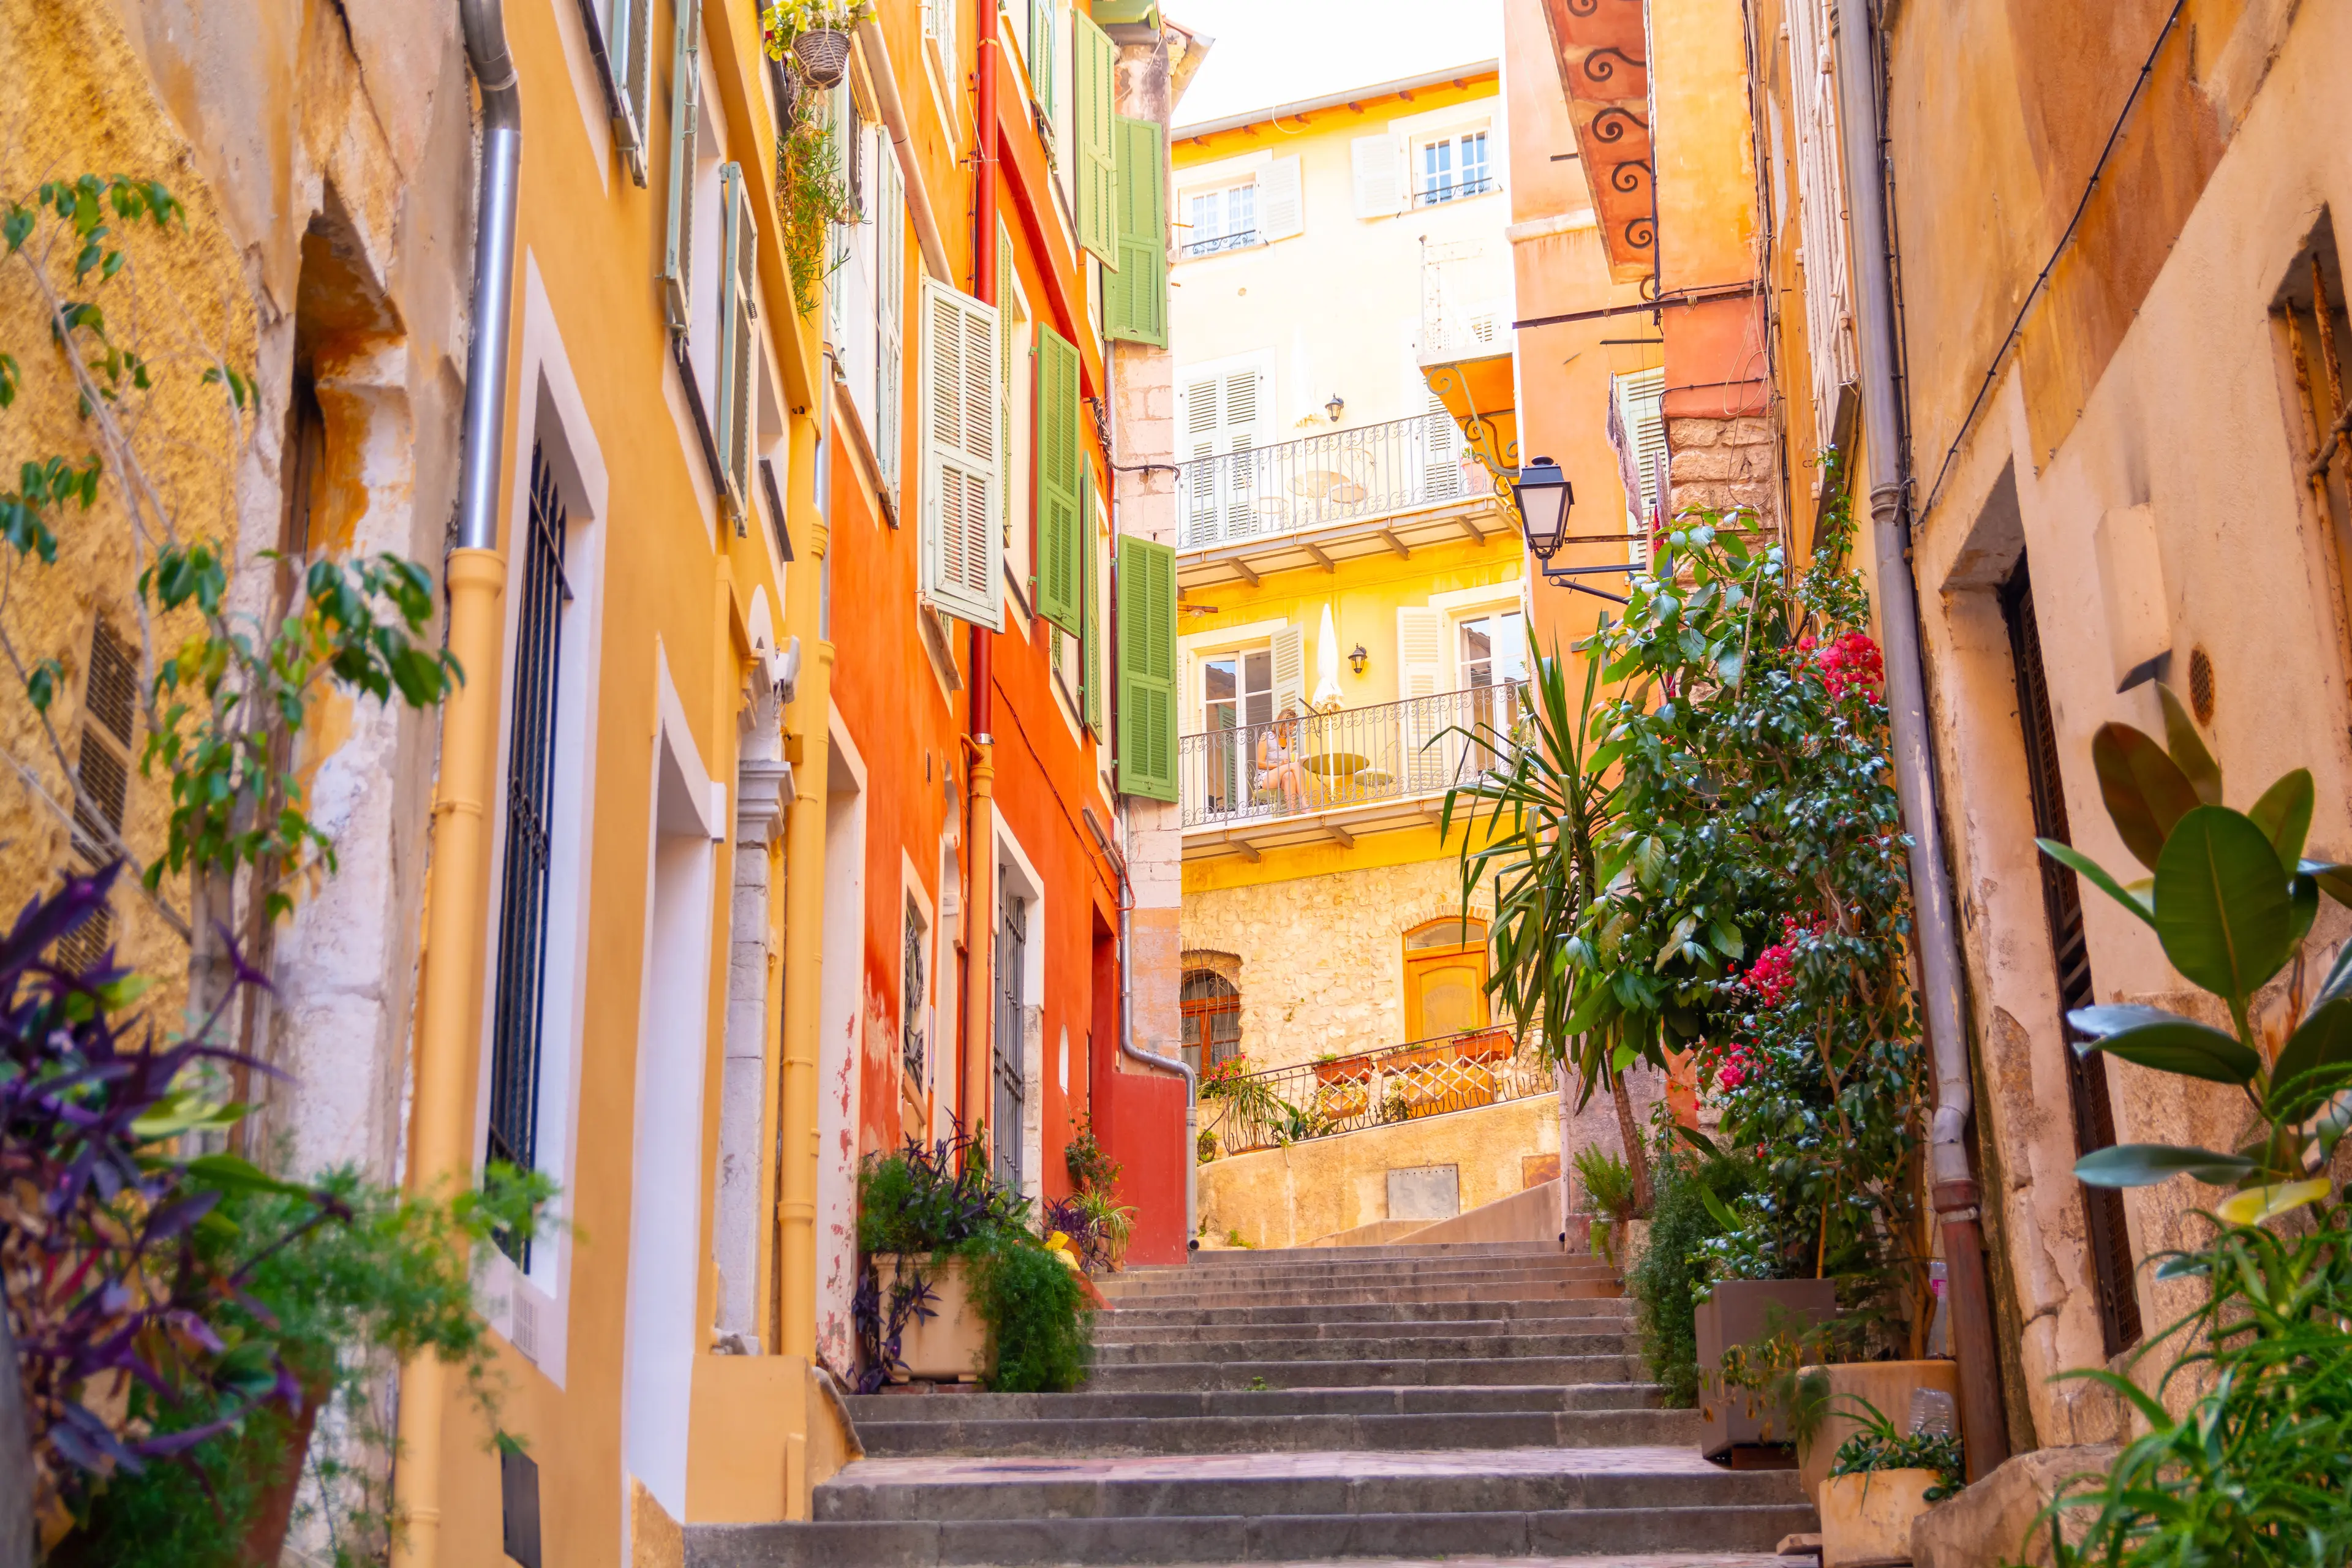 Explore Nice, France: An Exciting 2-Day Itinerary